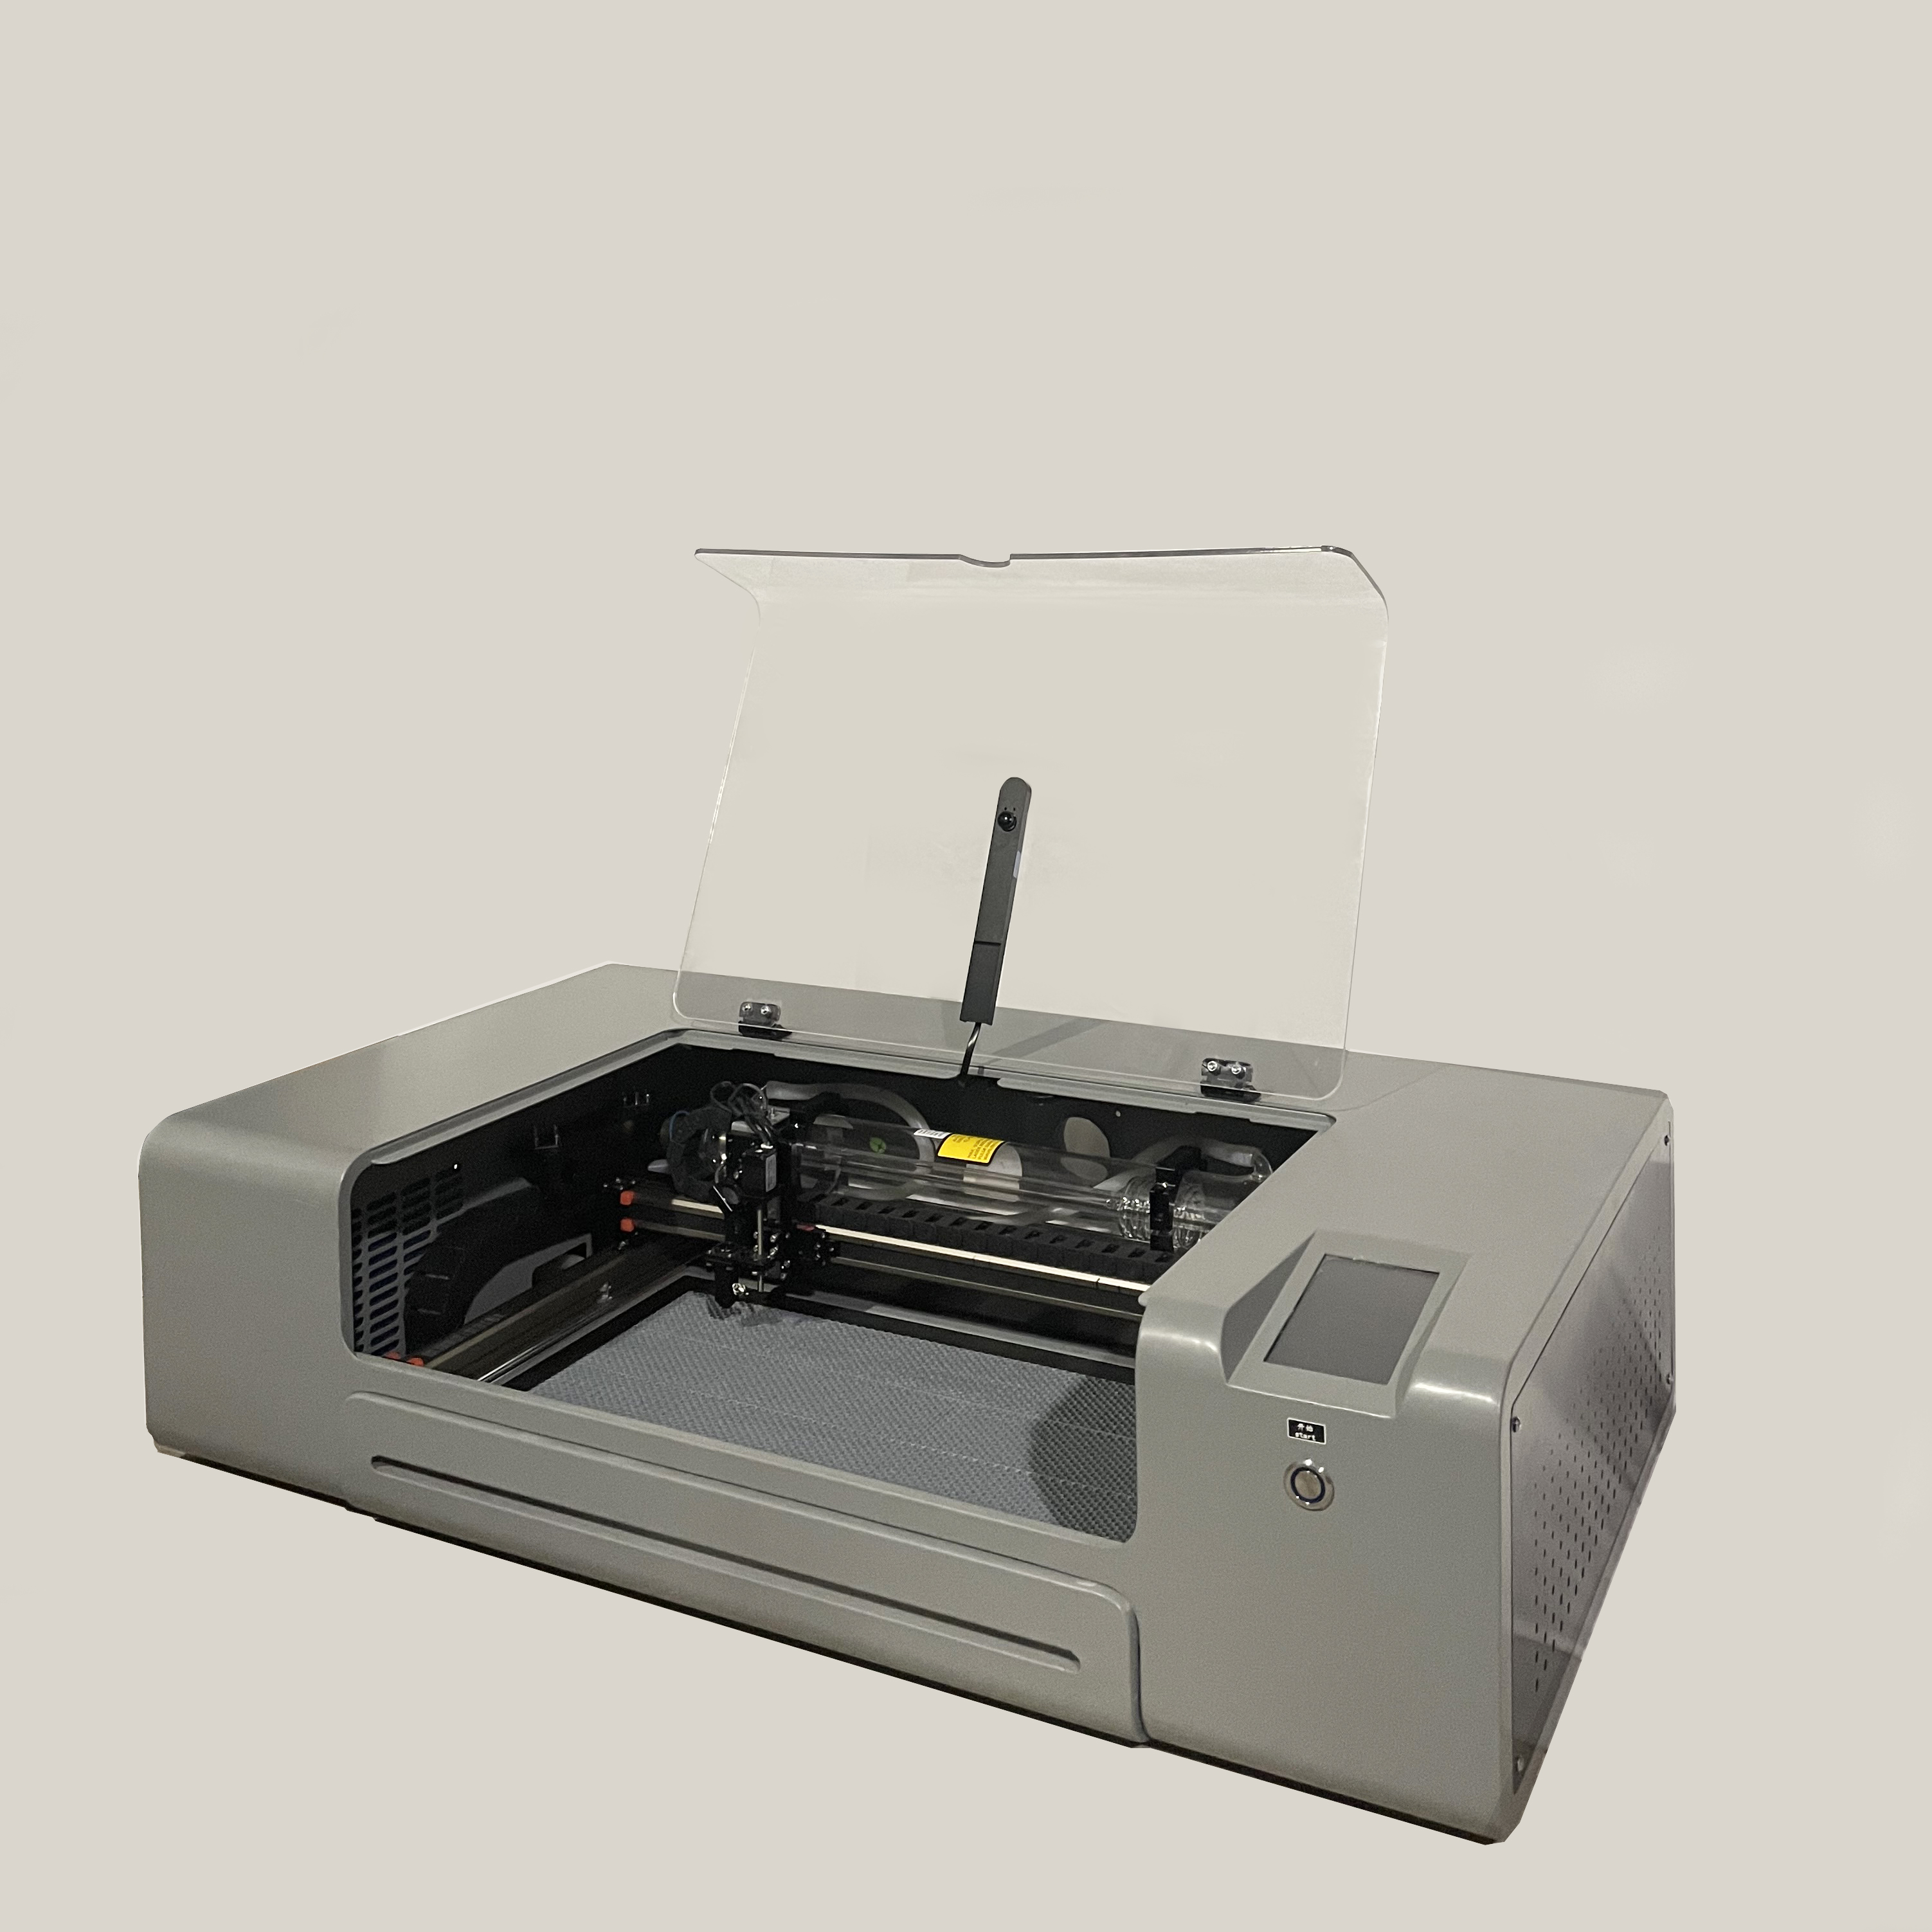 Small laser cutting machine for home use